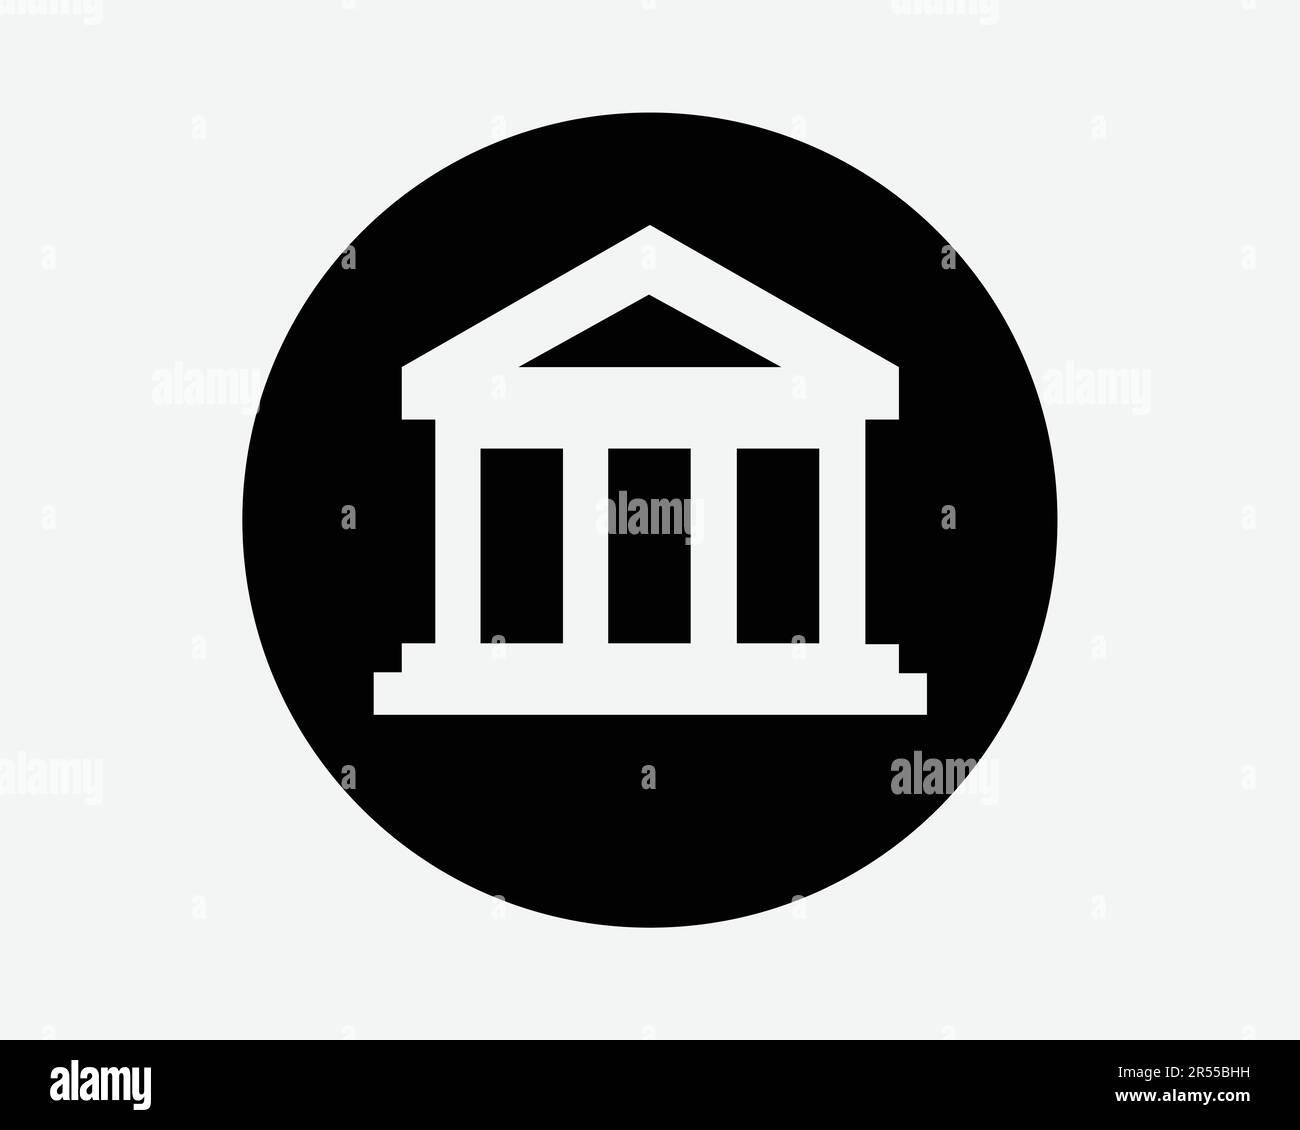 Bank Building Icon. Business Finance Banking Investment Government Courthouse Museum Sign Symbol Black Artwork Graphic Illustration Clipart EPS Vector Stock Vector